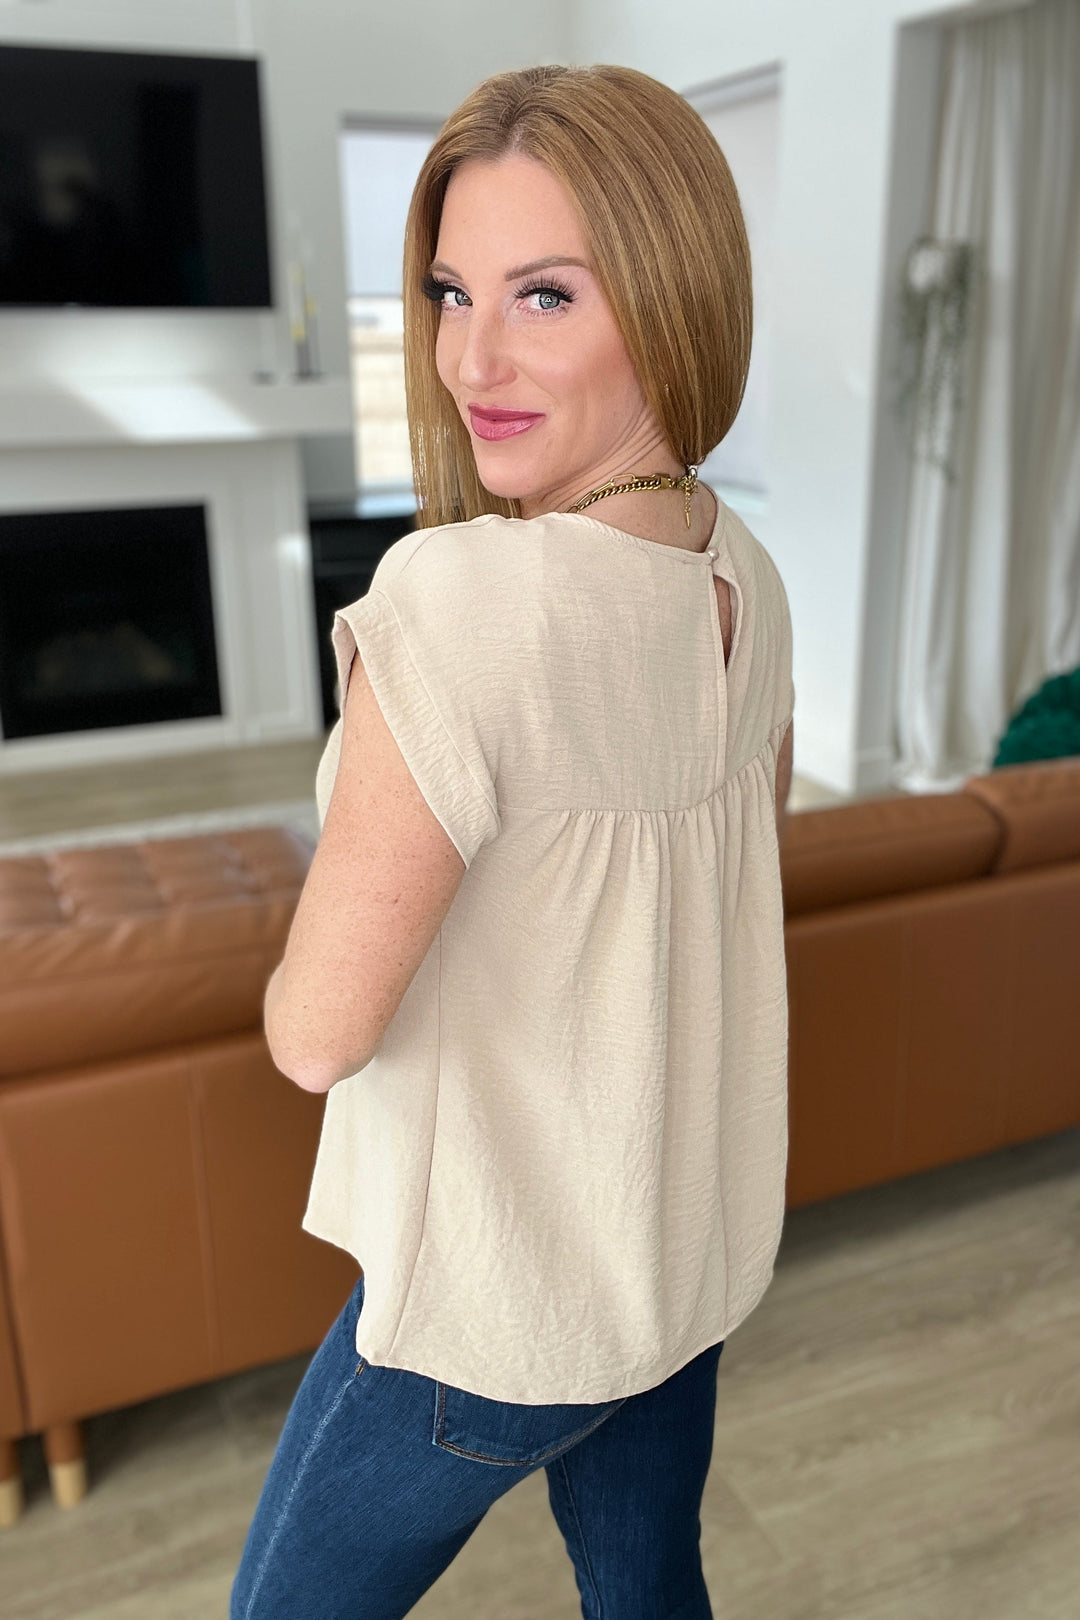 Airflow Babydoll Top in Taupe-Short Sleeve Tops-Inspired by Justeen-Women's Clothing Boutique in Chicago, Illinois